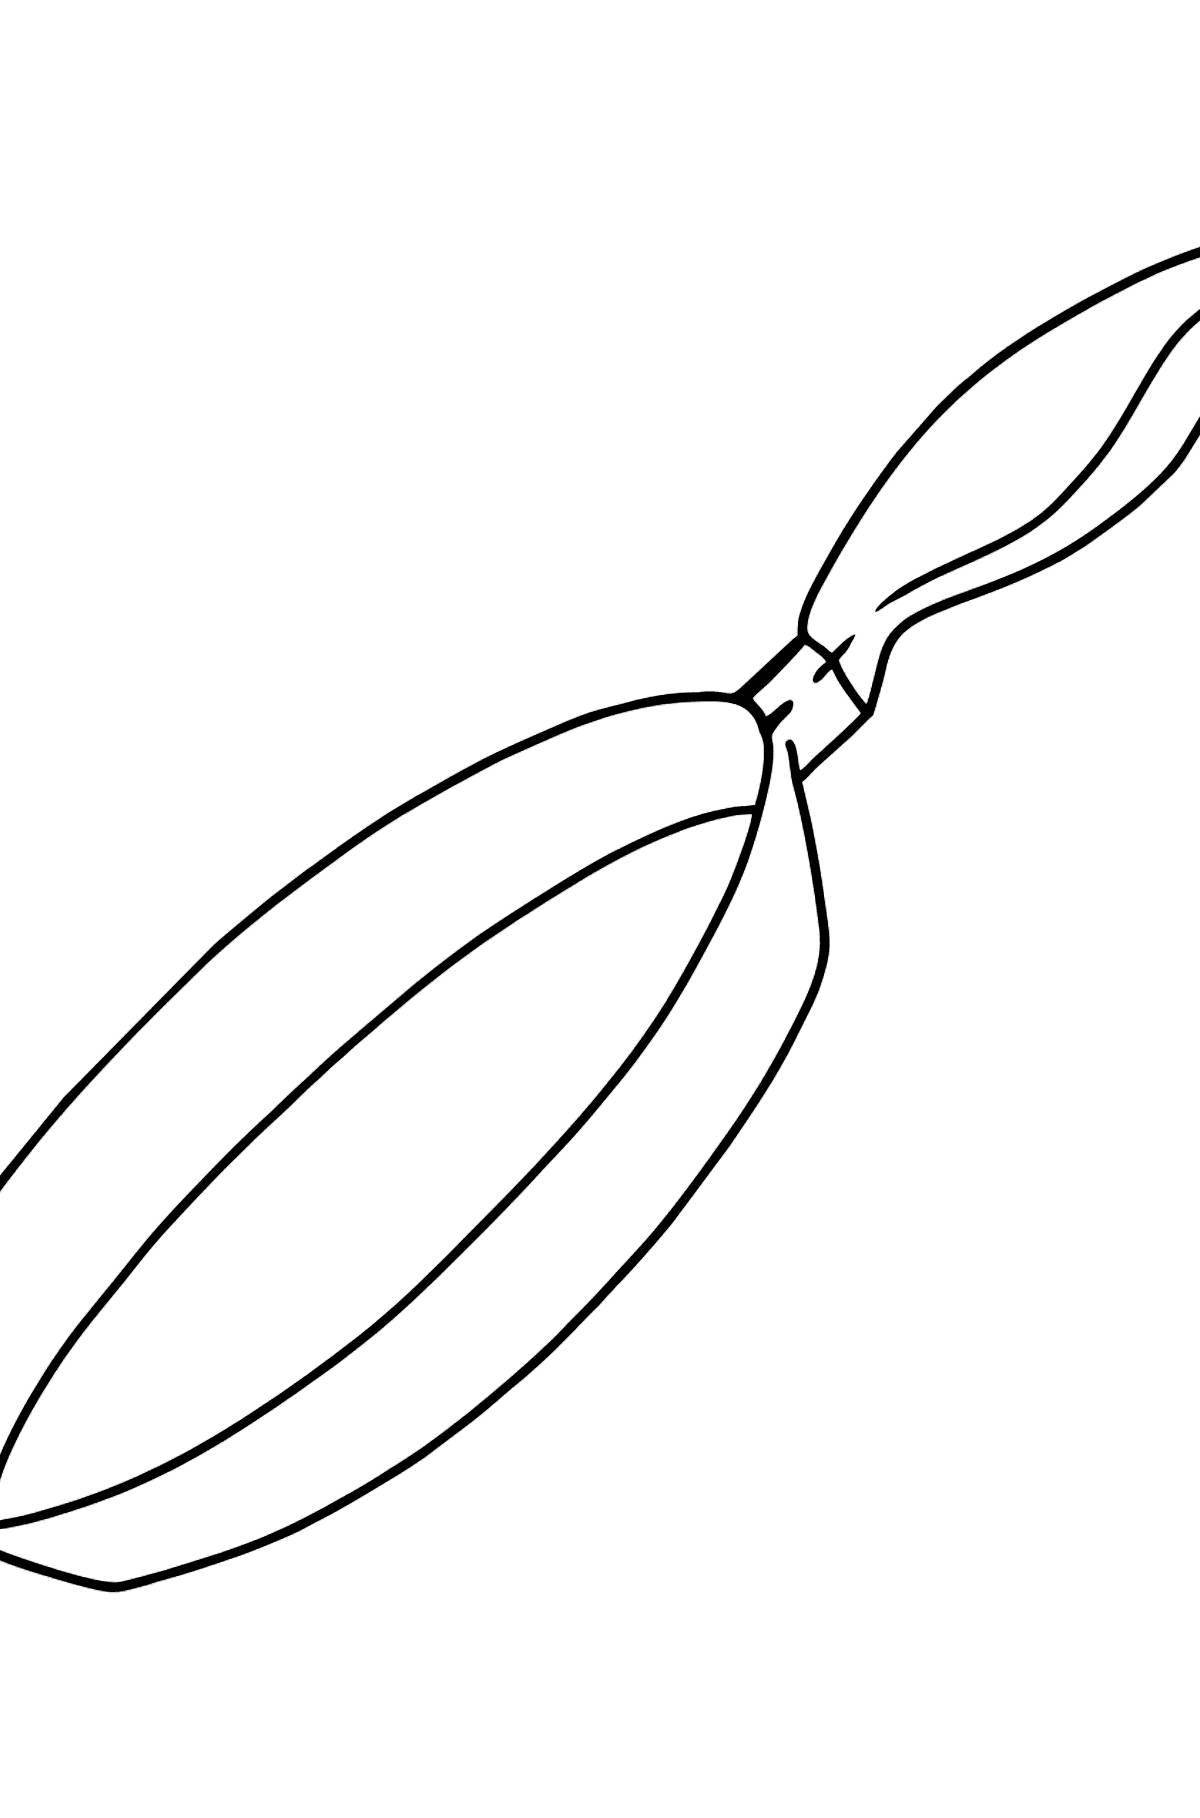 Excellent junior frying pan coloring page